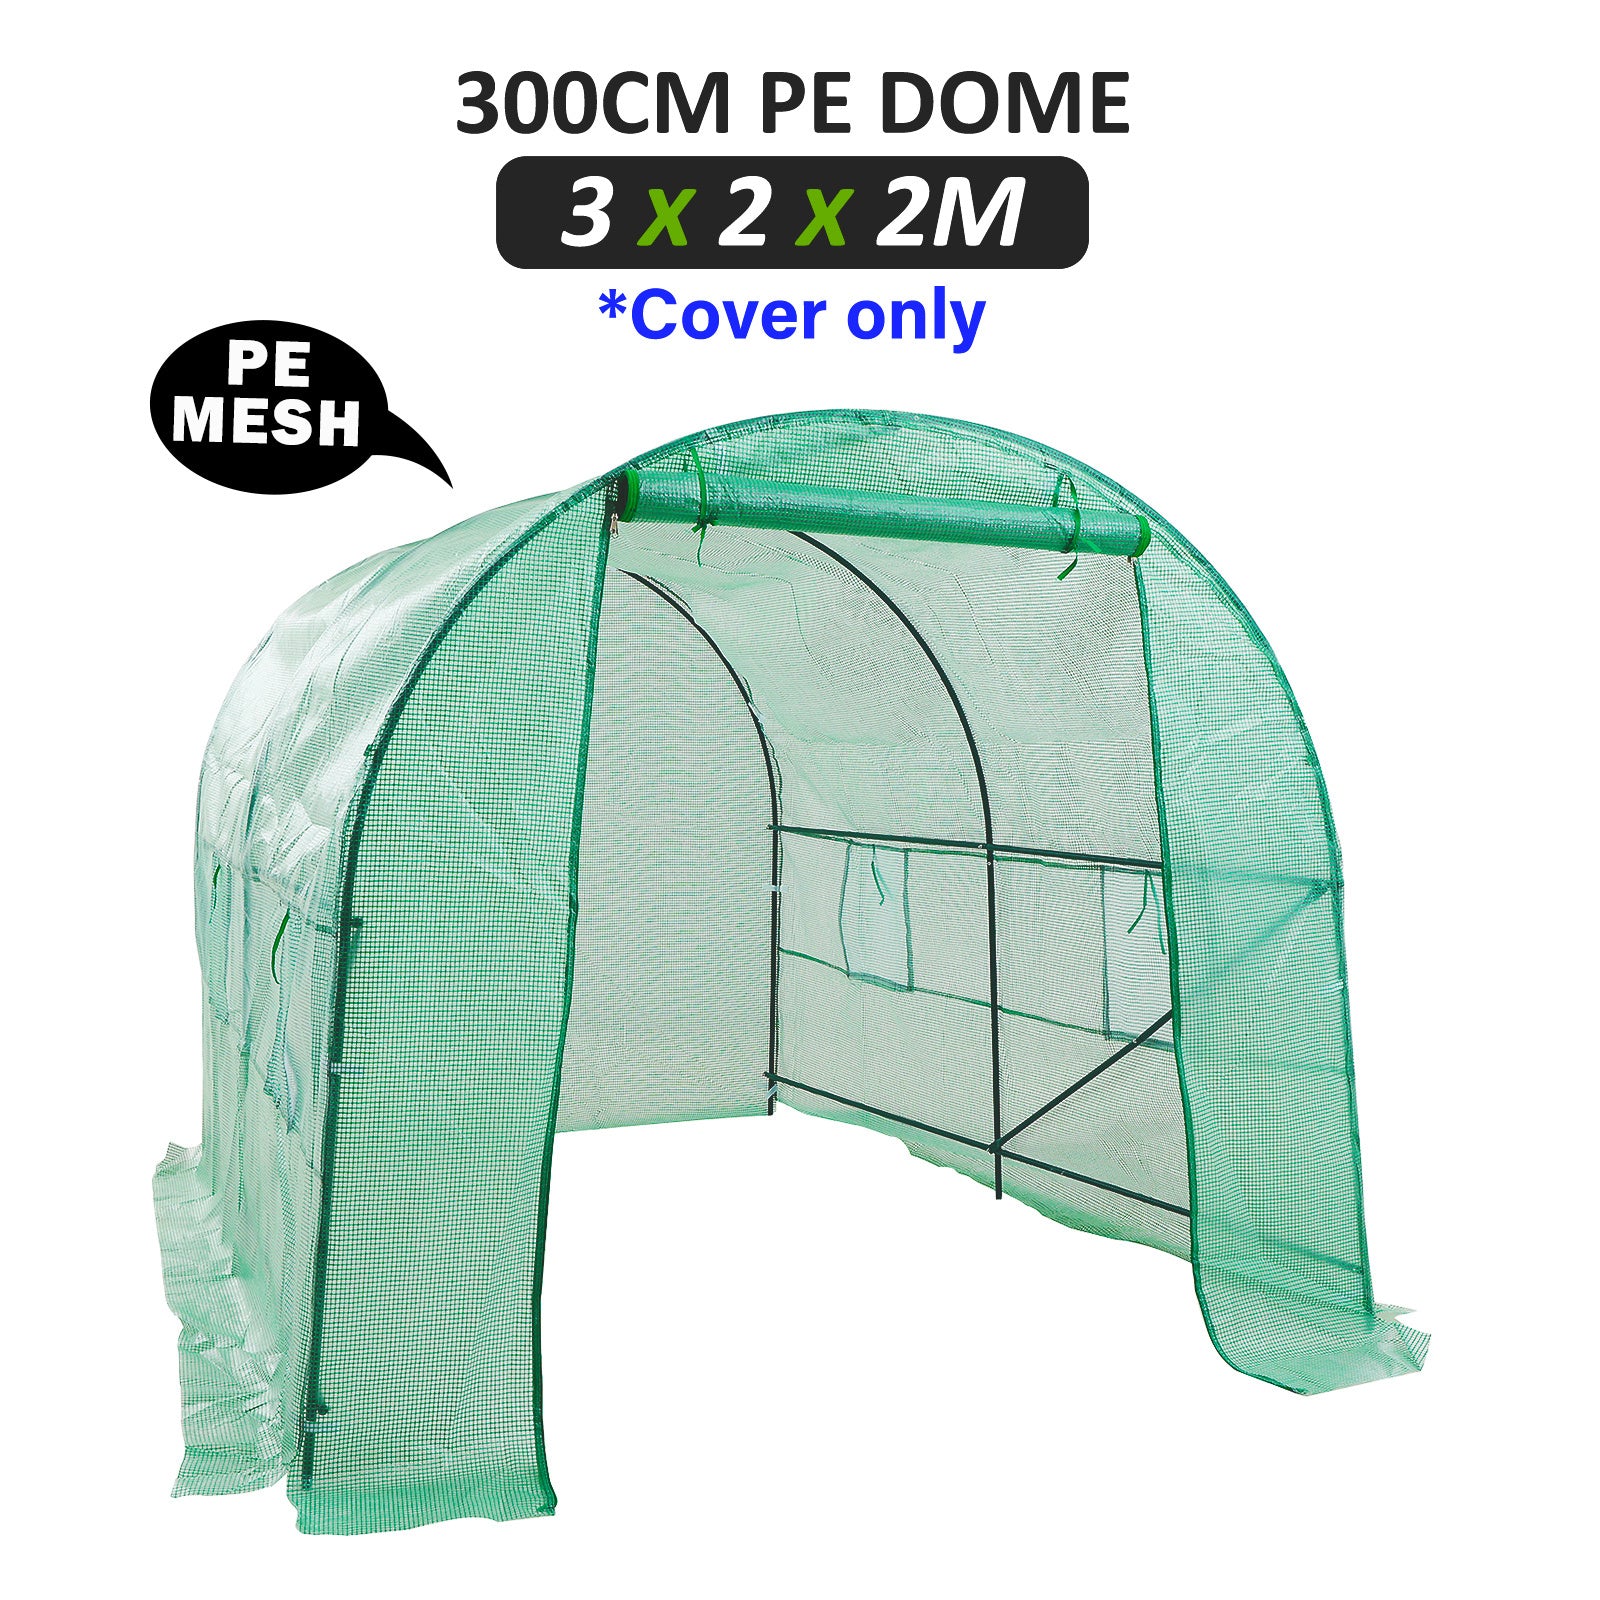 Dome Tunnel 300cm Garden Greenhouse Shed PE Cover Only